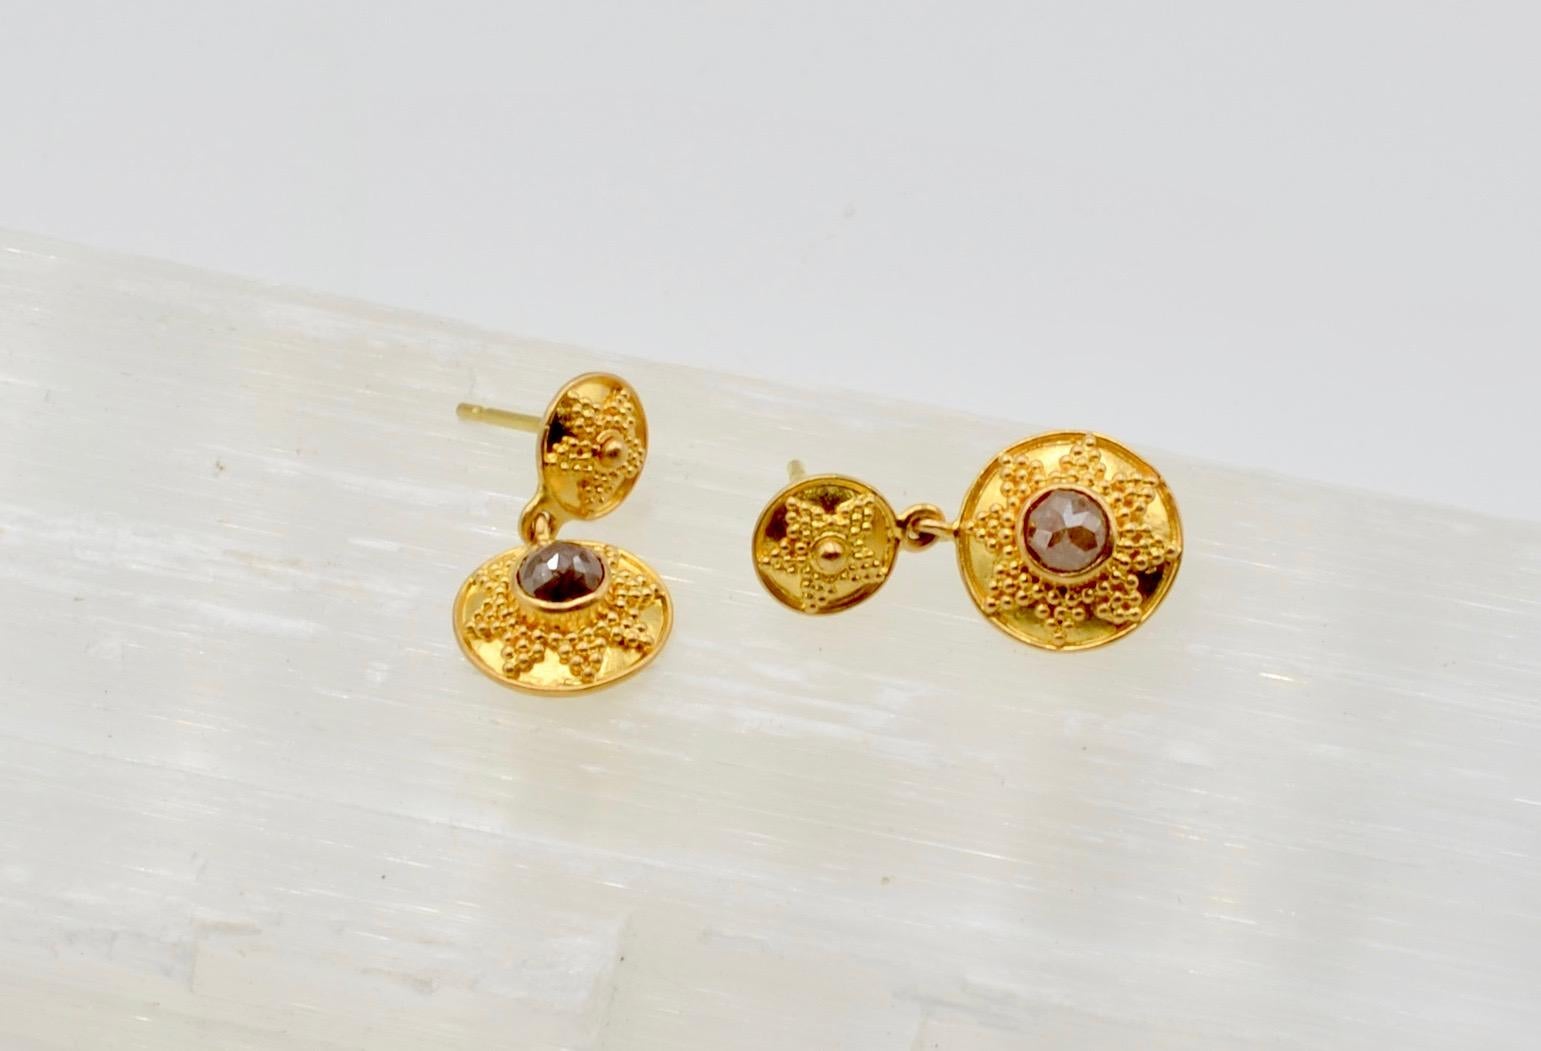 These Steven Battelle designed chocolate diamond earrings (1.1 carat  total weight ) set in 22 karat gold are the perfect combination of contrast and sparkle. The granulated Byzantine style is classic and perfect for the drop post design earrings.